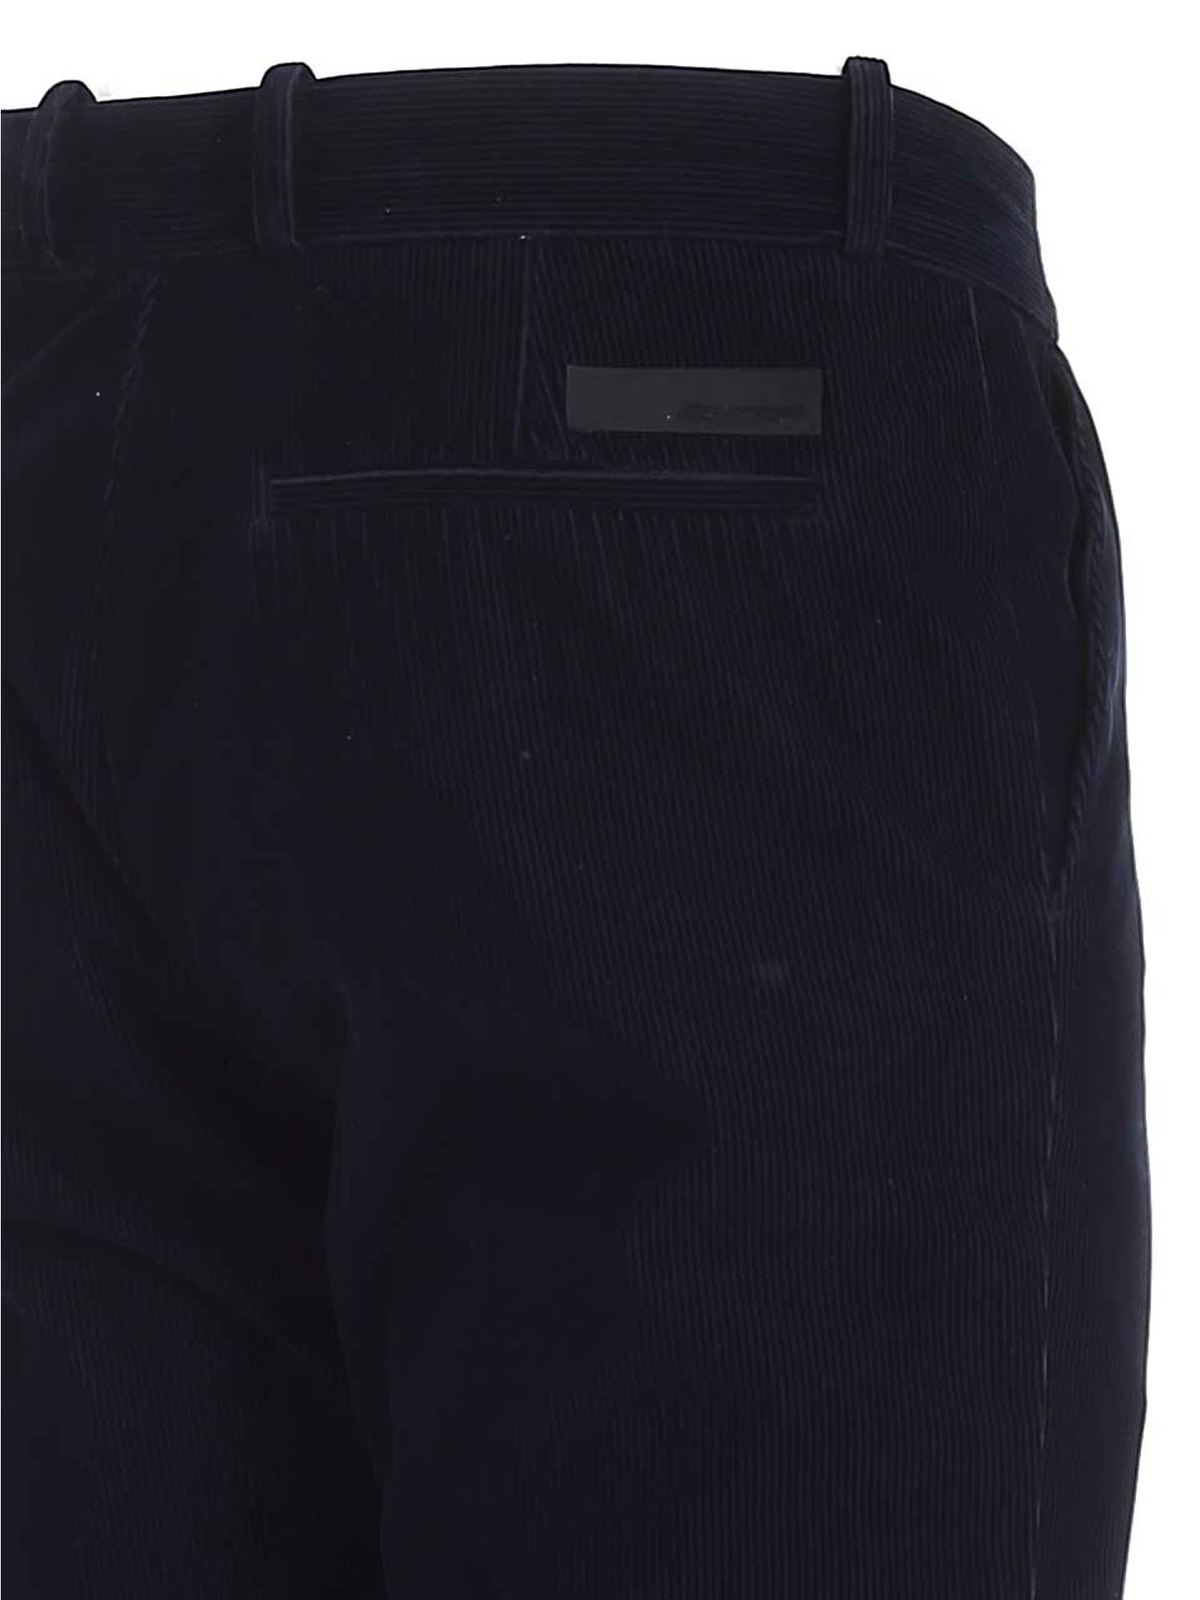 Casual trousers RRD Roberto Ricci Designs - Corduroy pants in blue ...